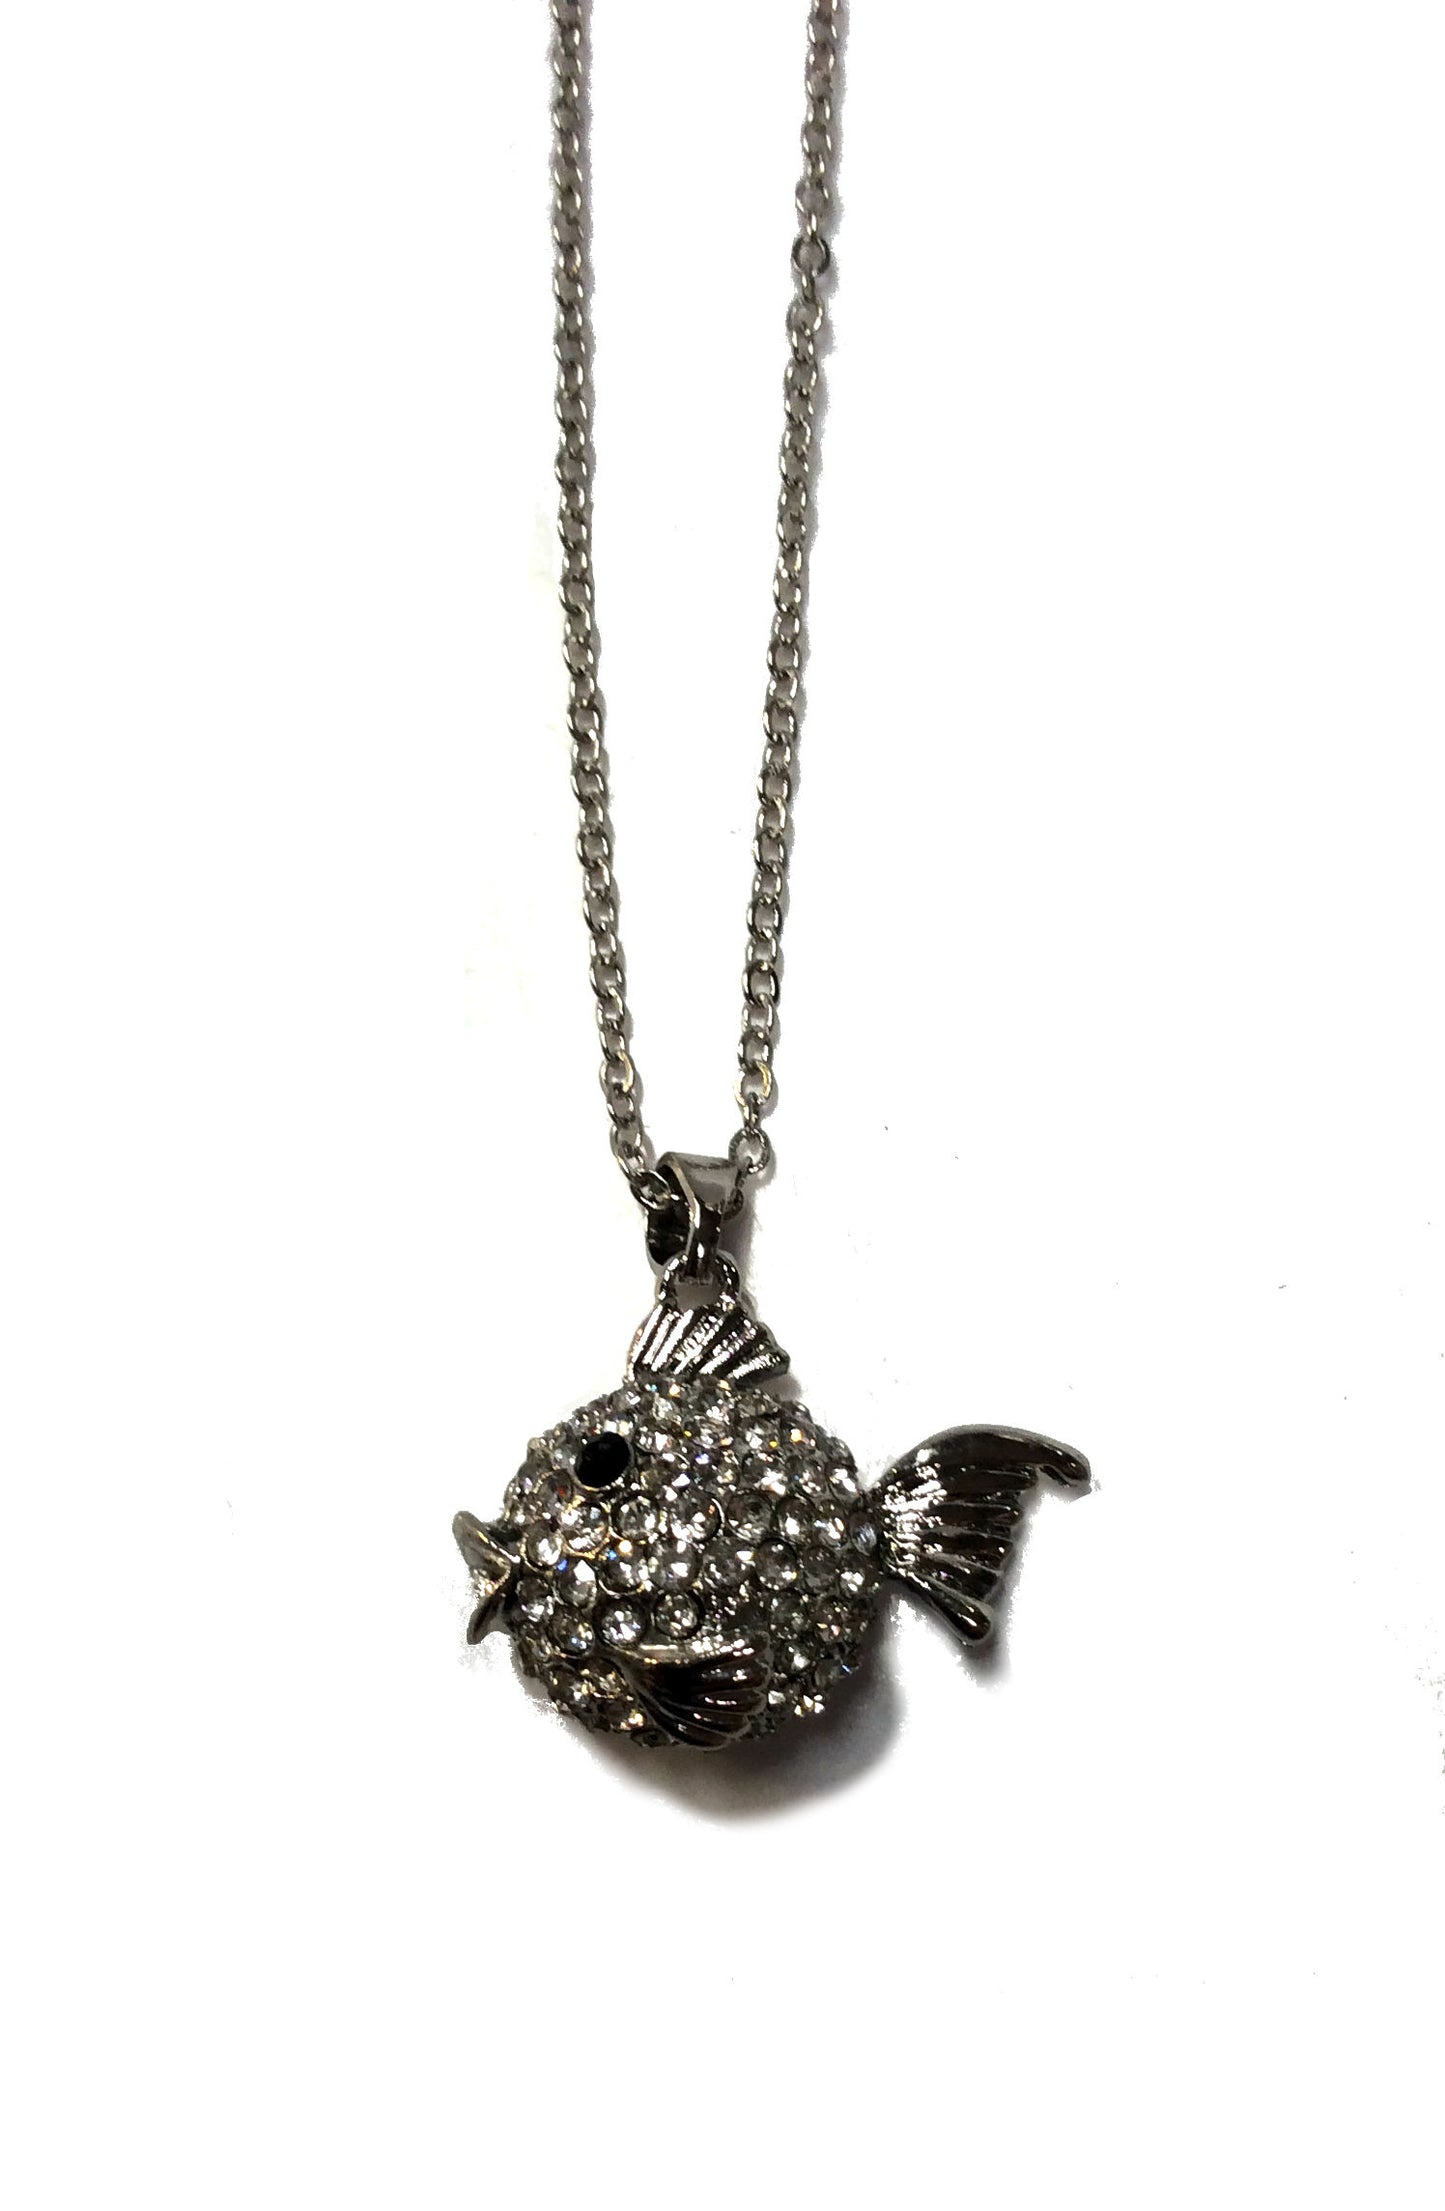 Fish Necklace #12-13636